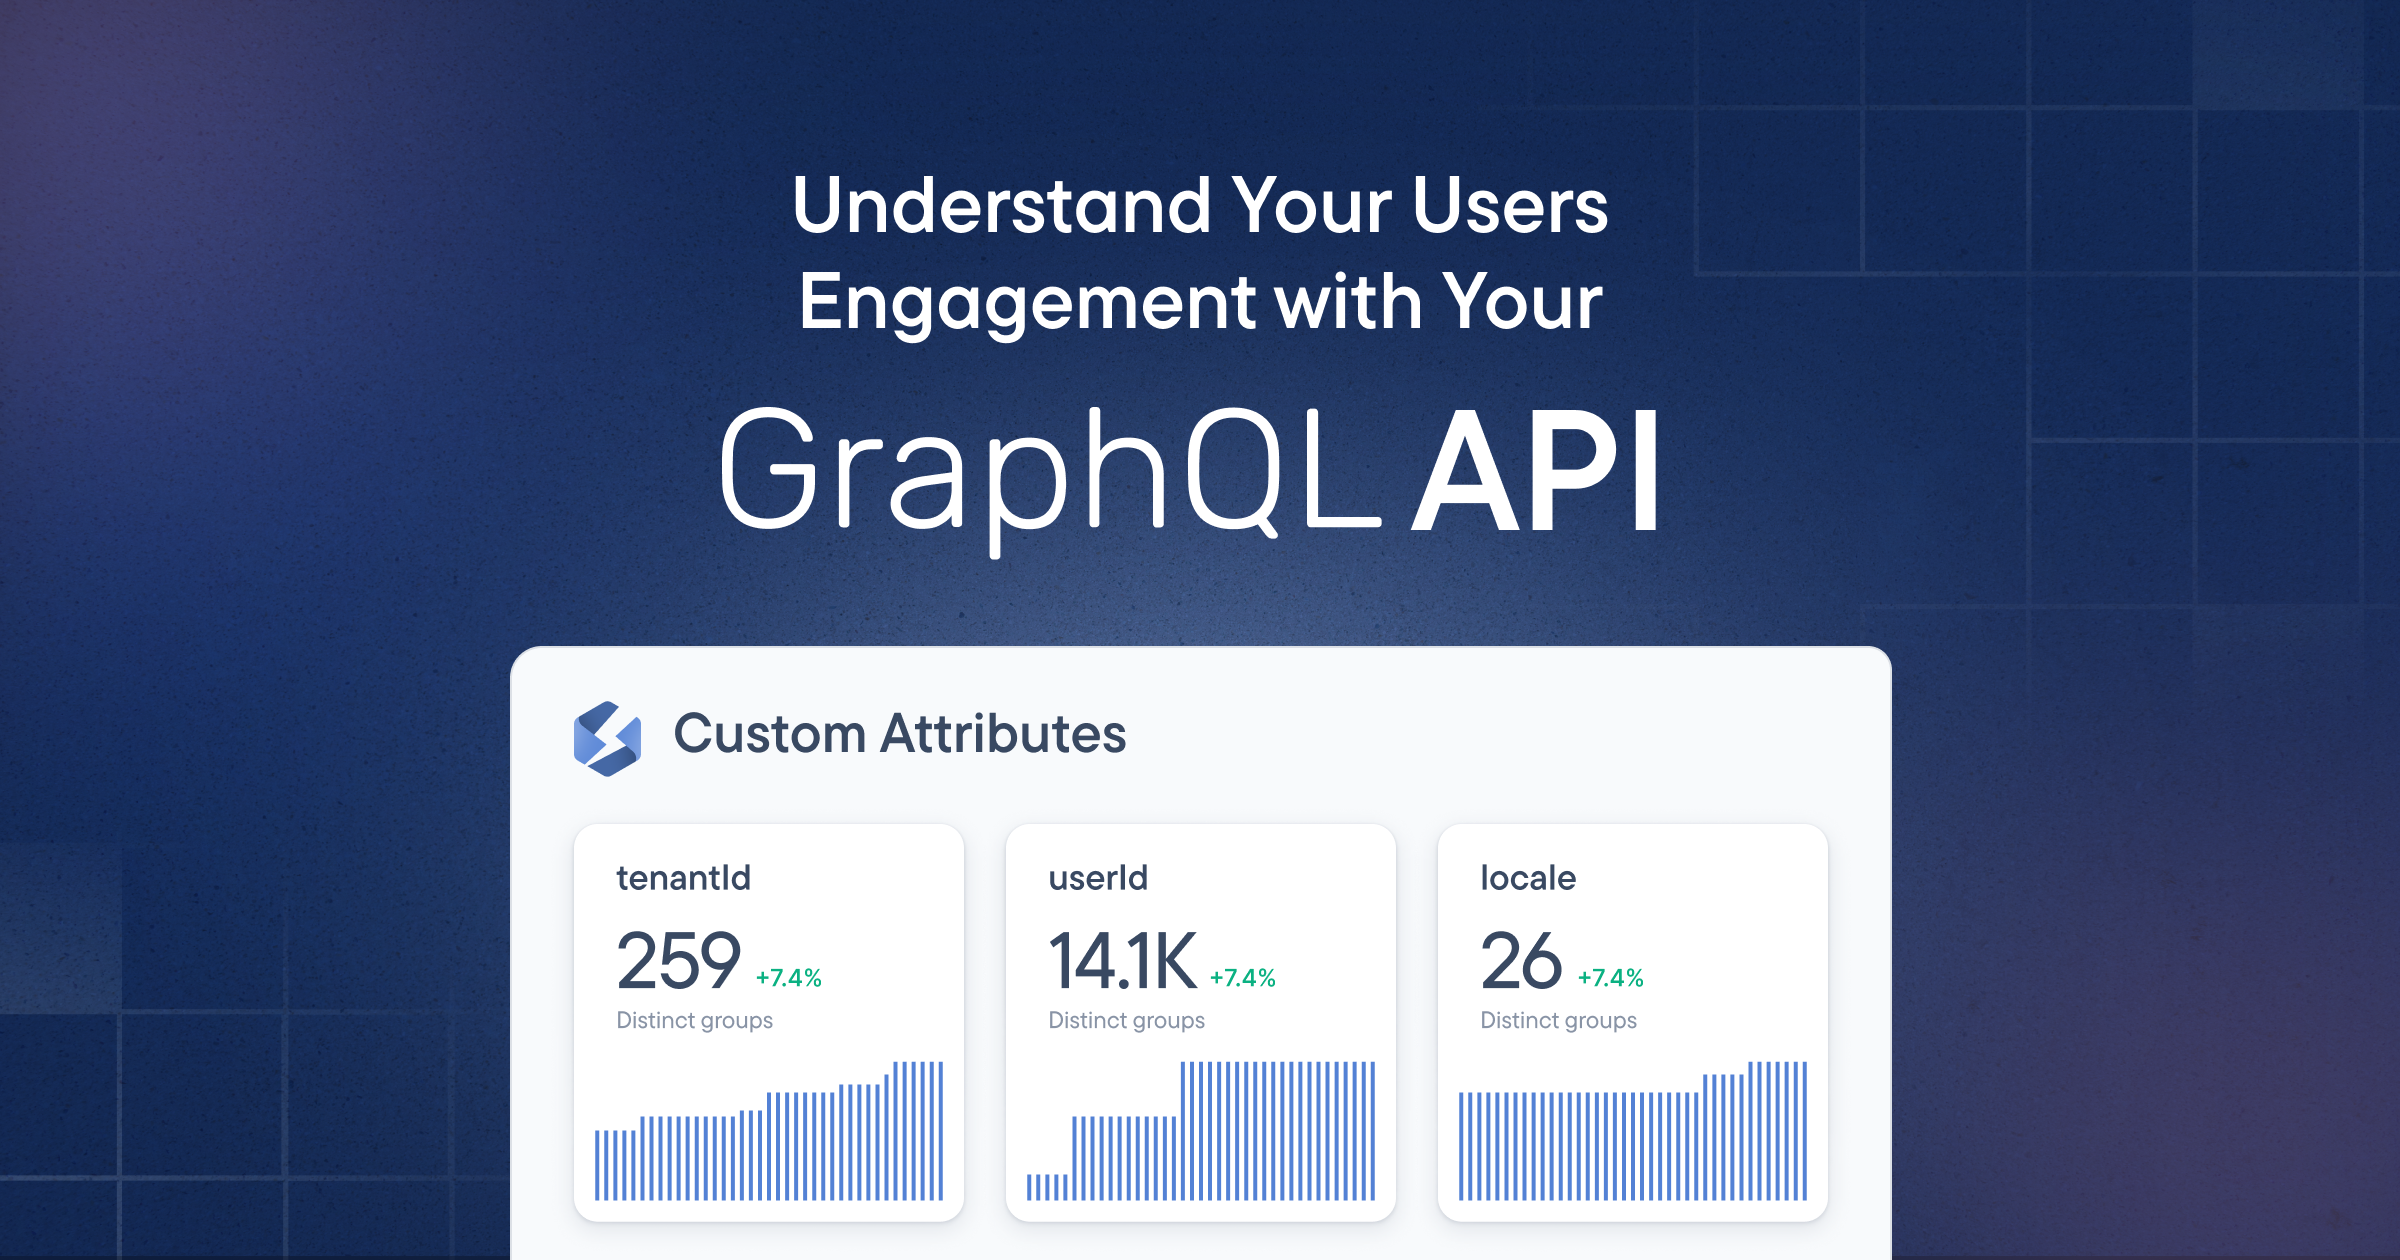 Announcing Custom Attributes: Understand Your Users Engagement with Your GraphQL API